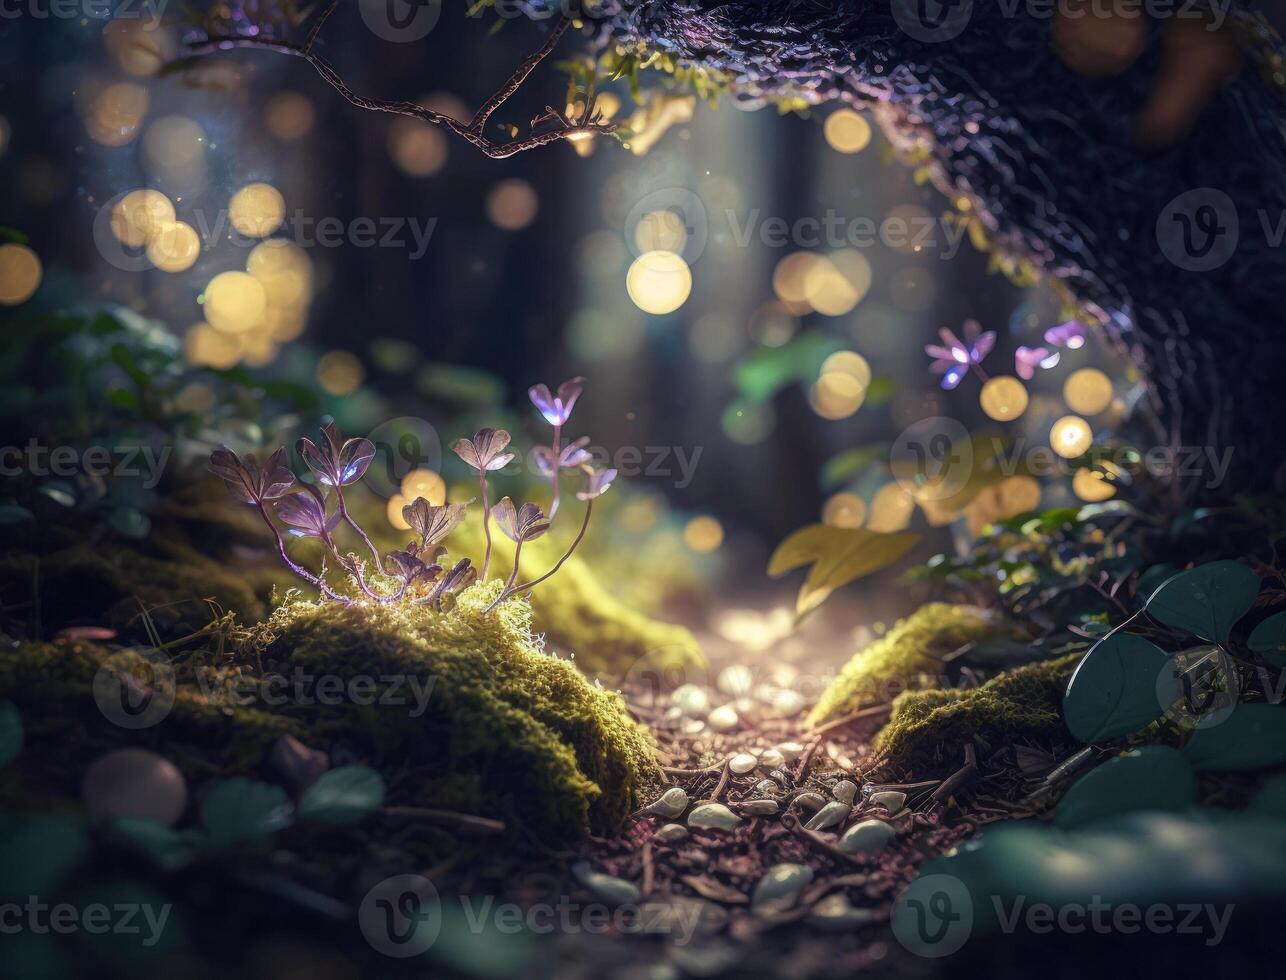 Fantasy forest landscape created with technology photo